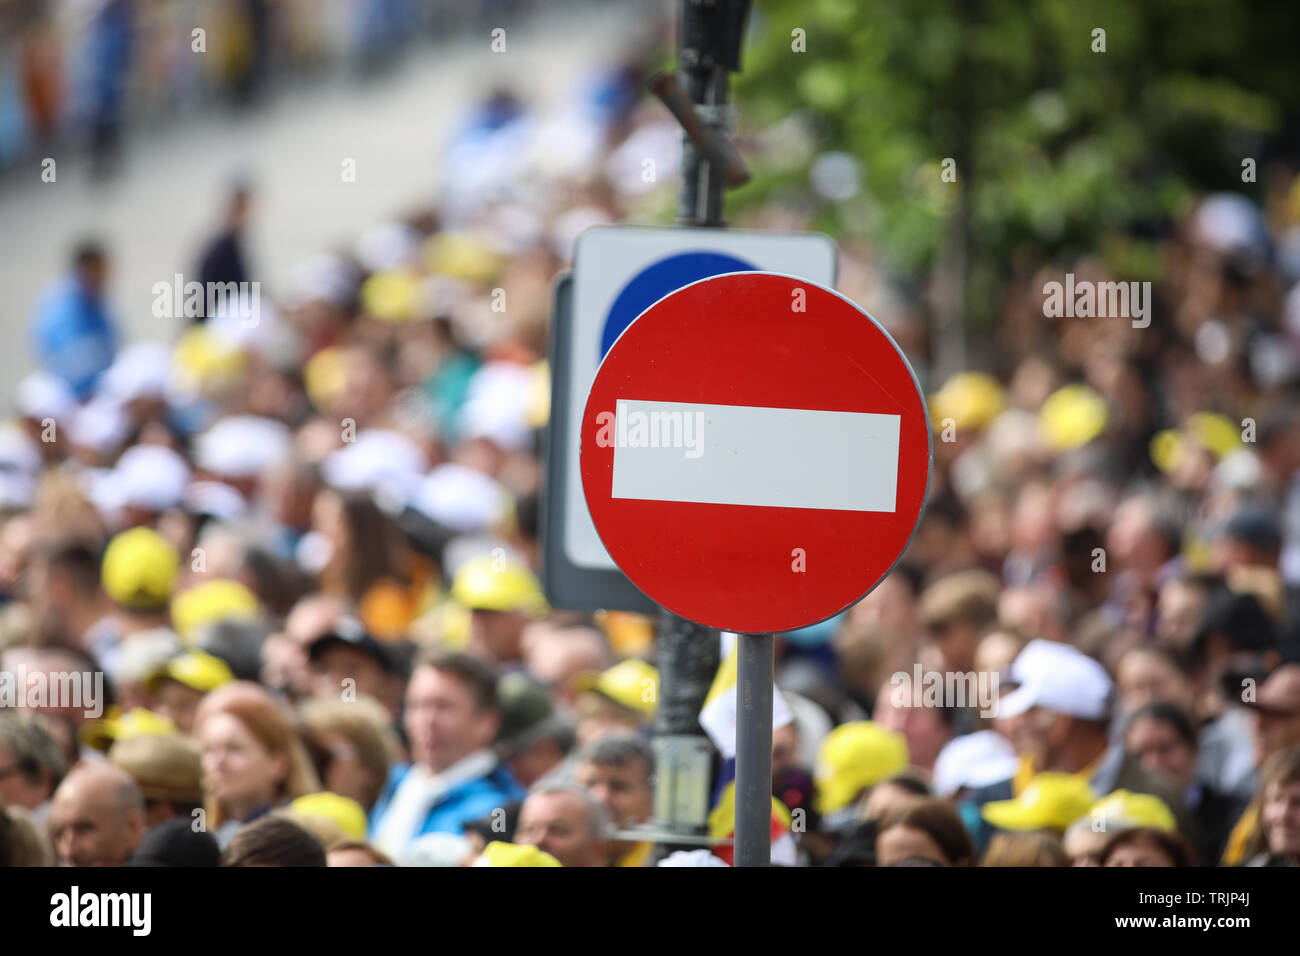 Access denied road sign with a large mass of people in the background - social or mass control Stock Photo